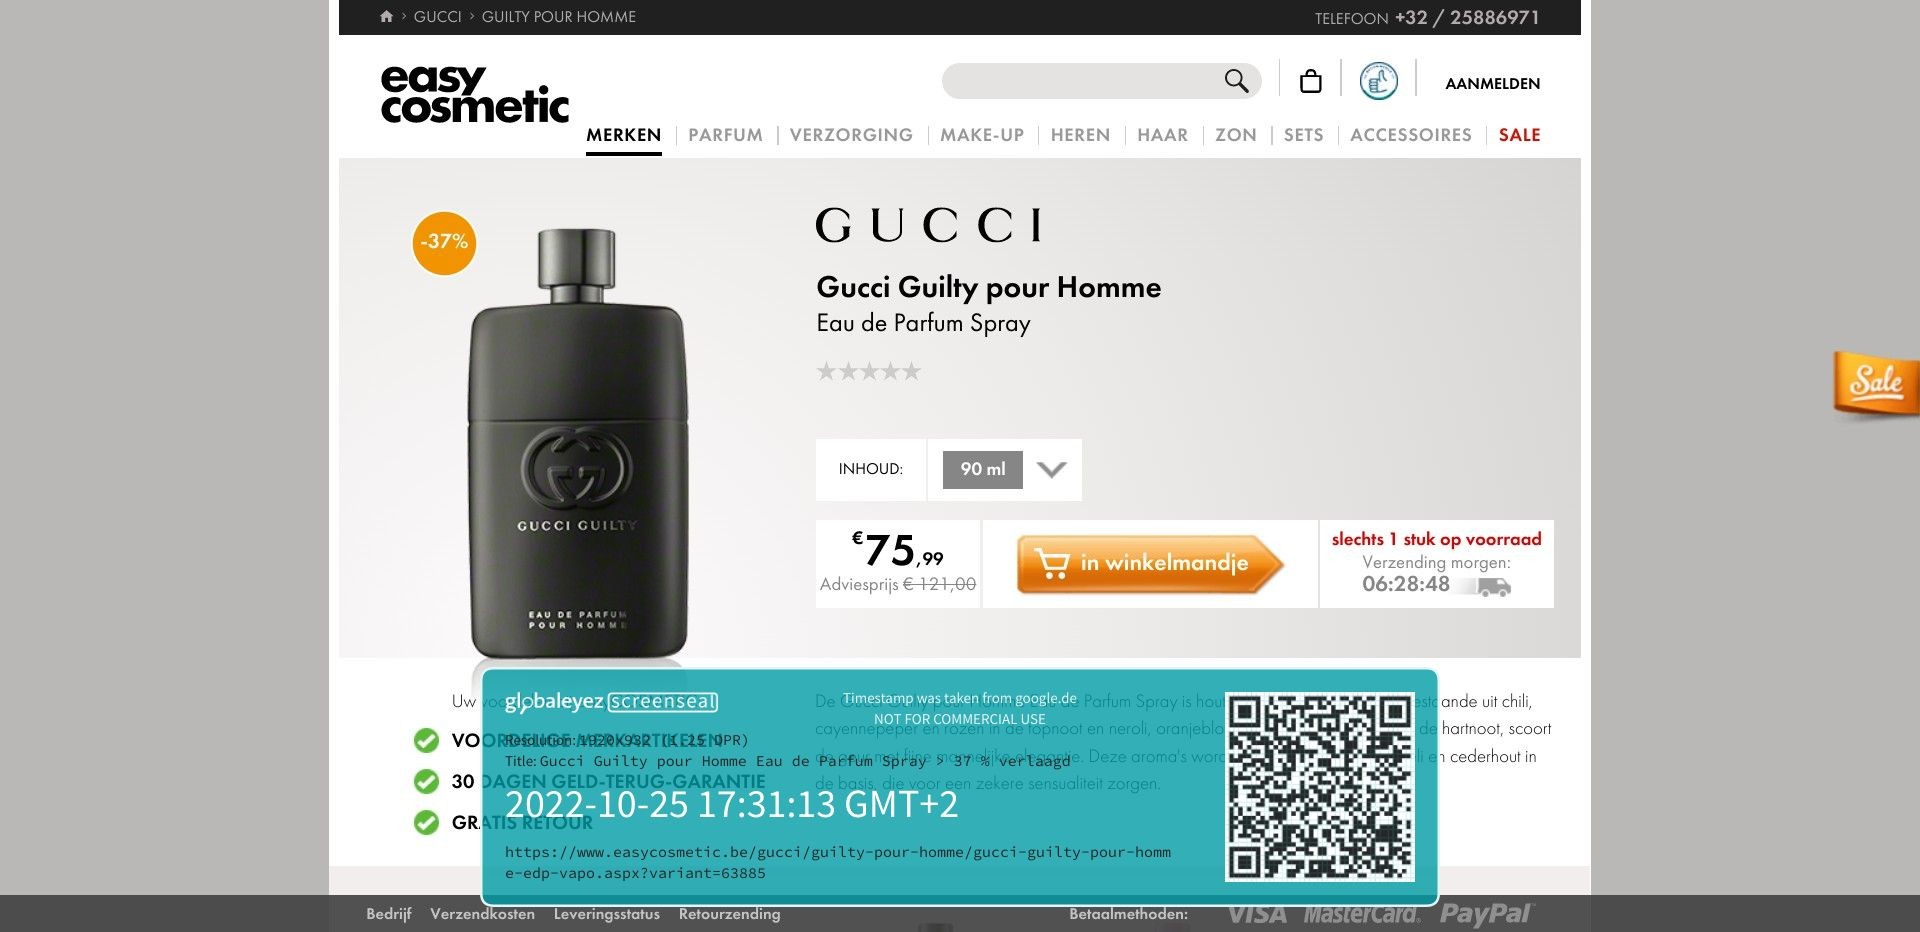 Screenshot of a listing on easycosmetics.be displaying a listing for Guilty pour Homme